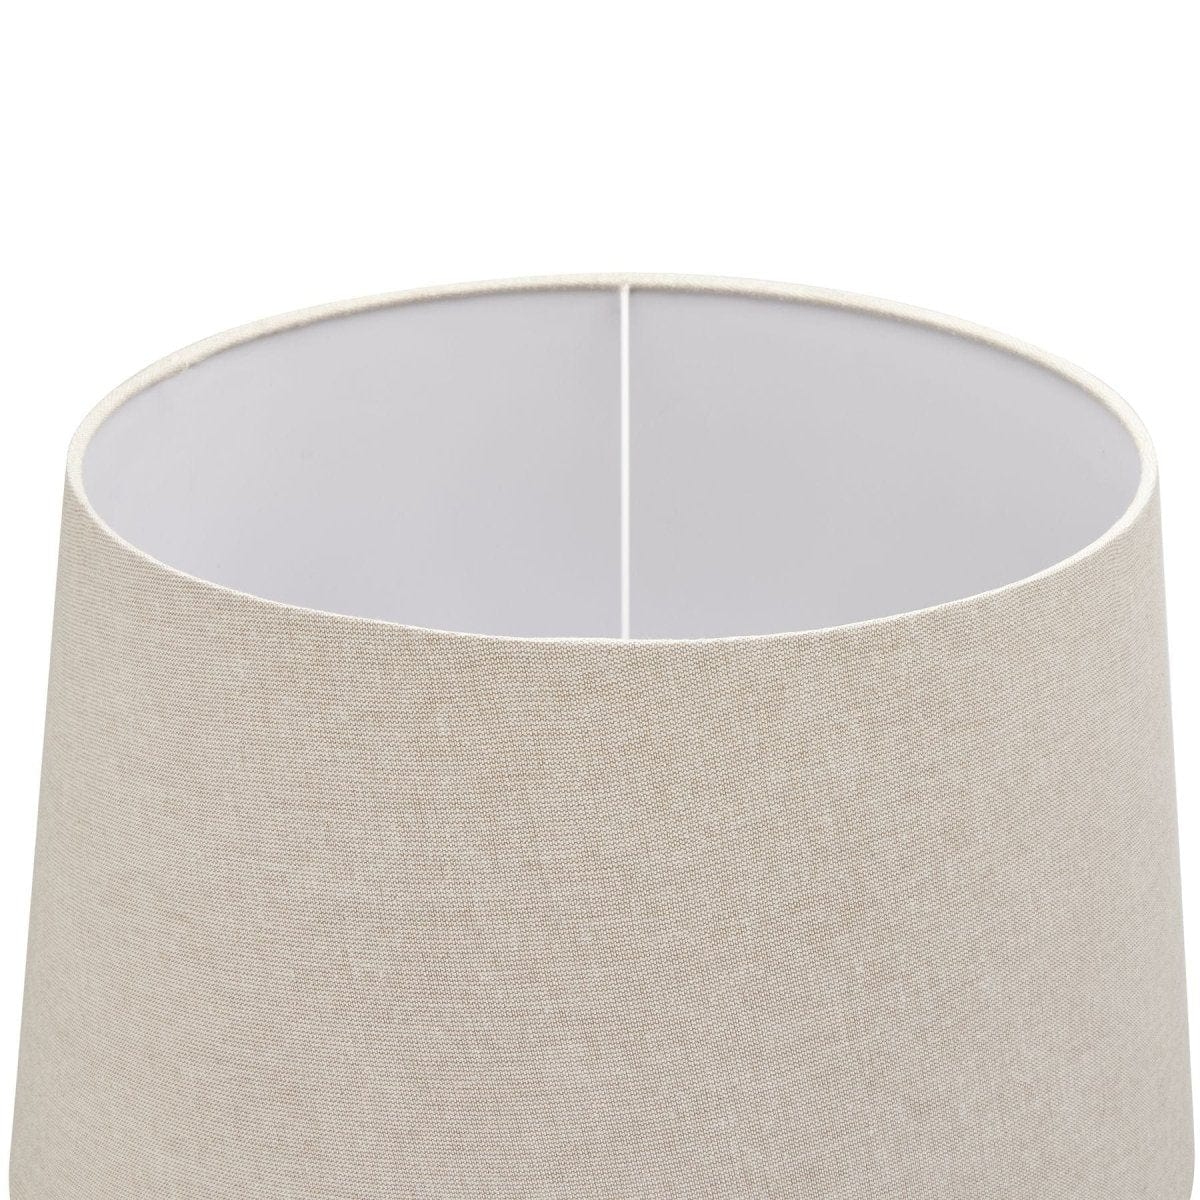 Hill Interiors Table lamp Delaney Grey Pillar Table Lamp With Linen Shade